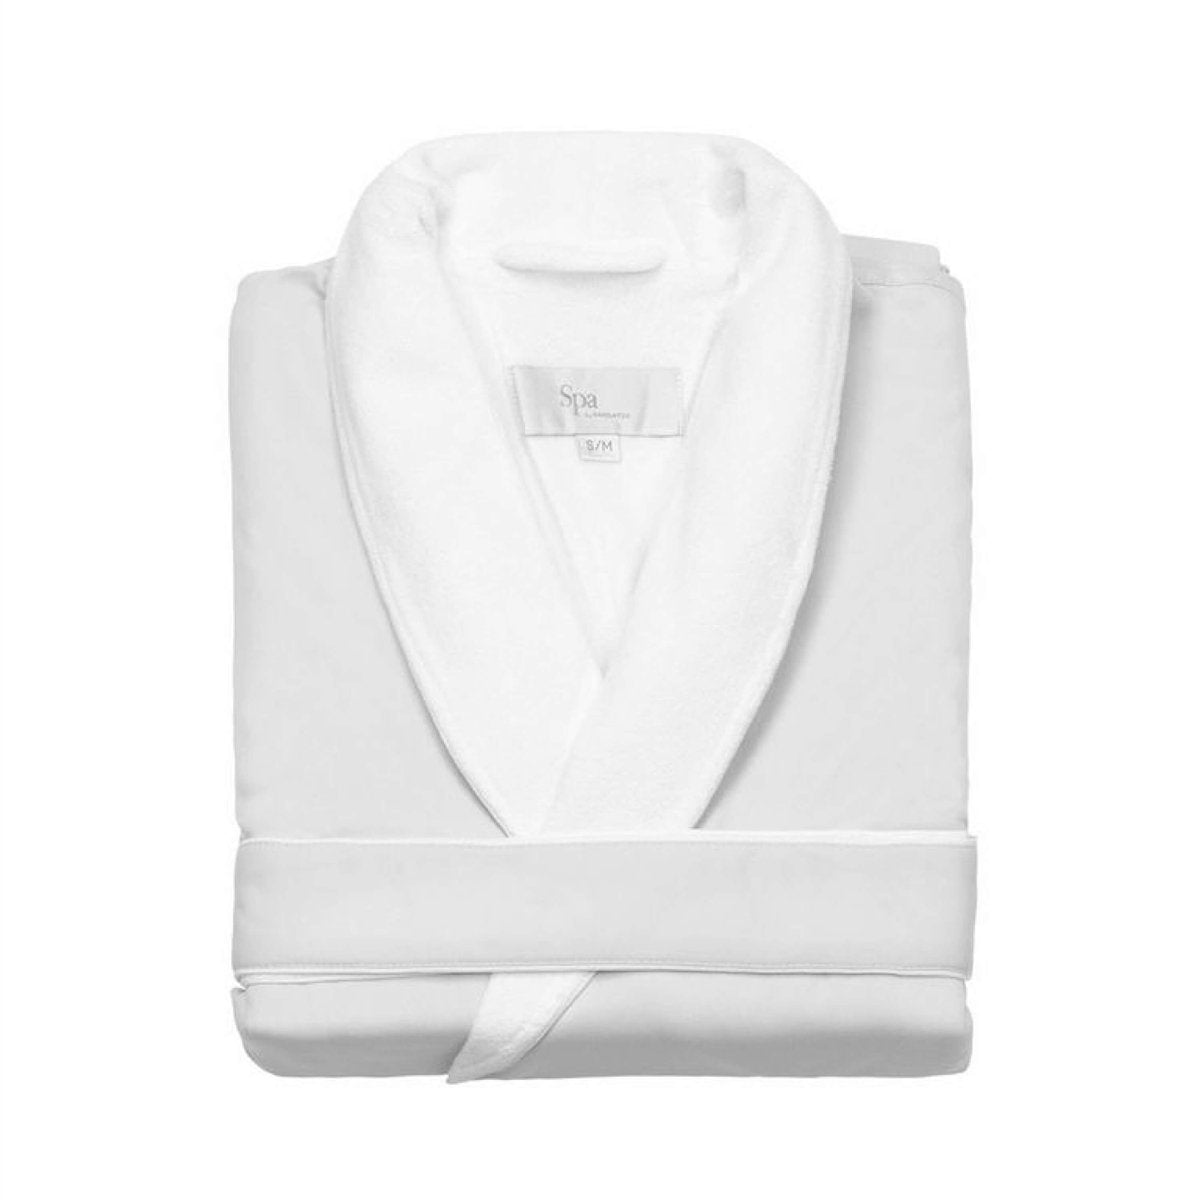 SPA Robe Personalized Luxury for Weddings, Anniversary, Graduations - 80% Cotton Terry / 20% Microfiber Polyester Exterior - www.towel.com